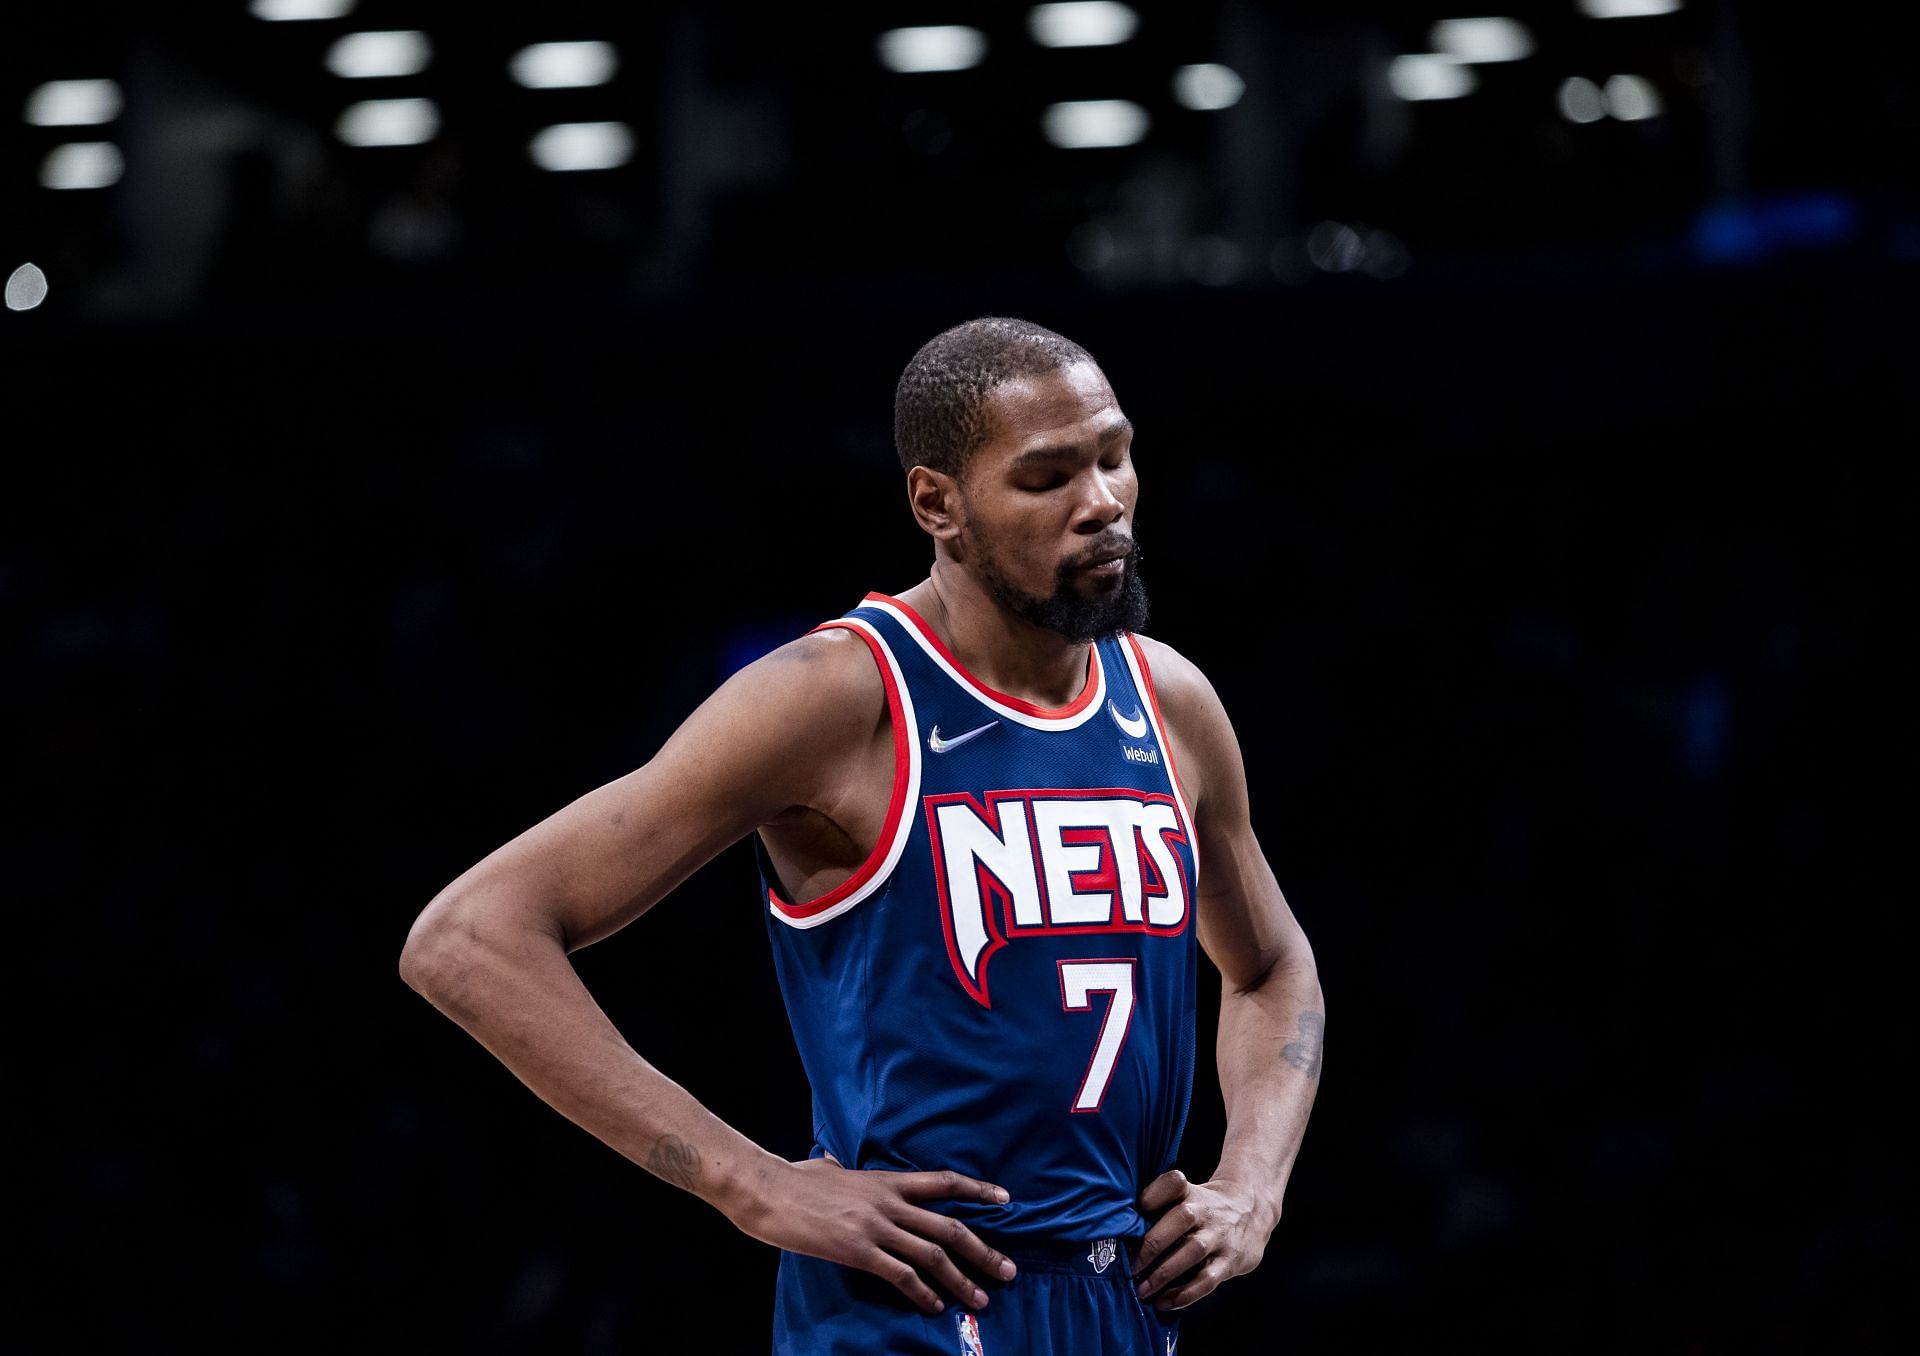 Brooklyn Nets superstar Kevin Durant reacts during a game